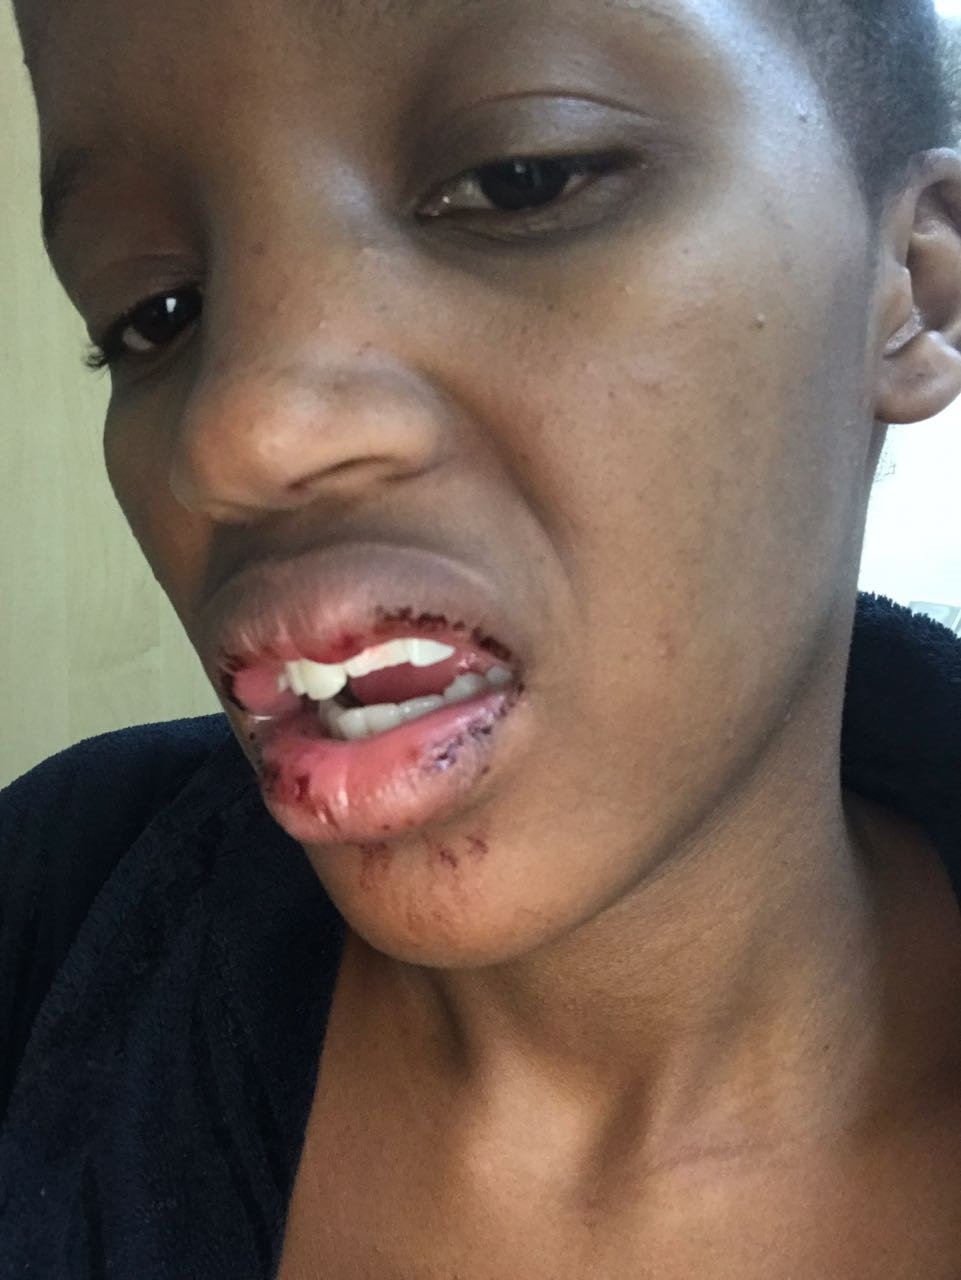 Neo Tsele claims she has been assaulted by Mthokozisi Ndaba. Picture: Supplied 